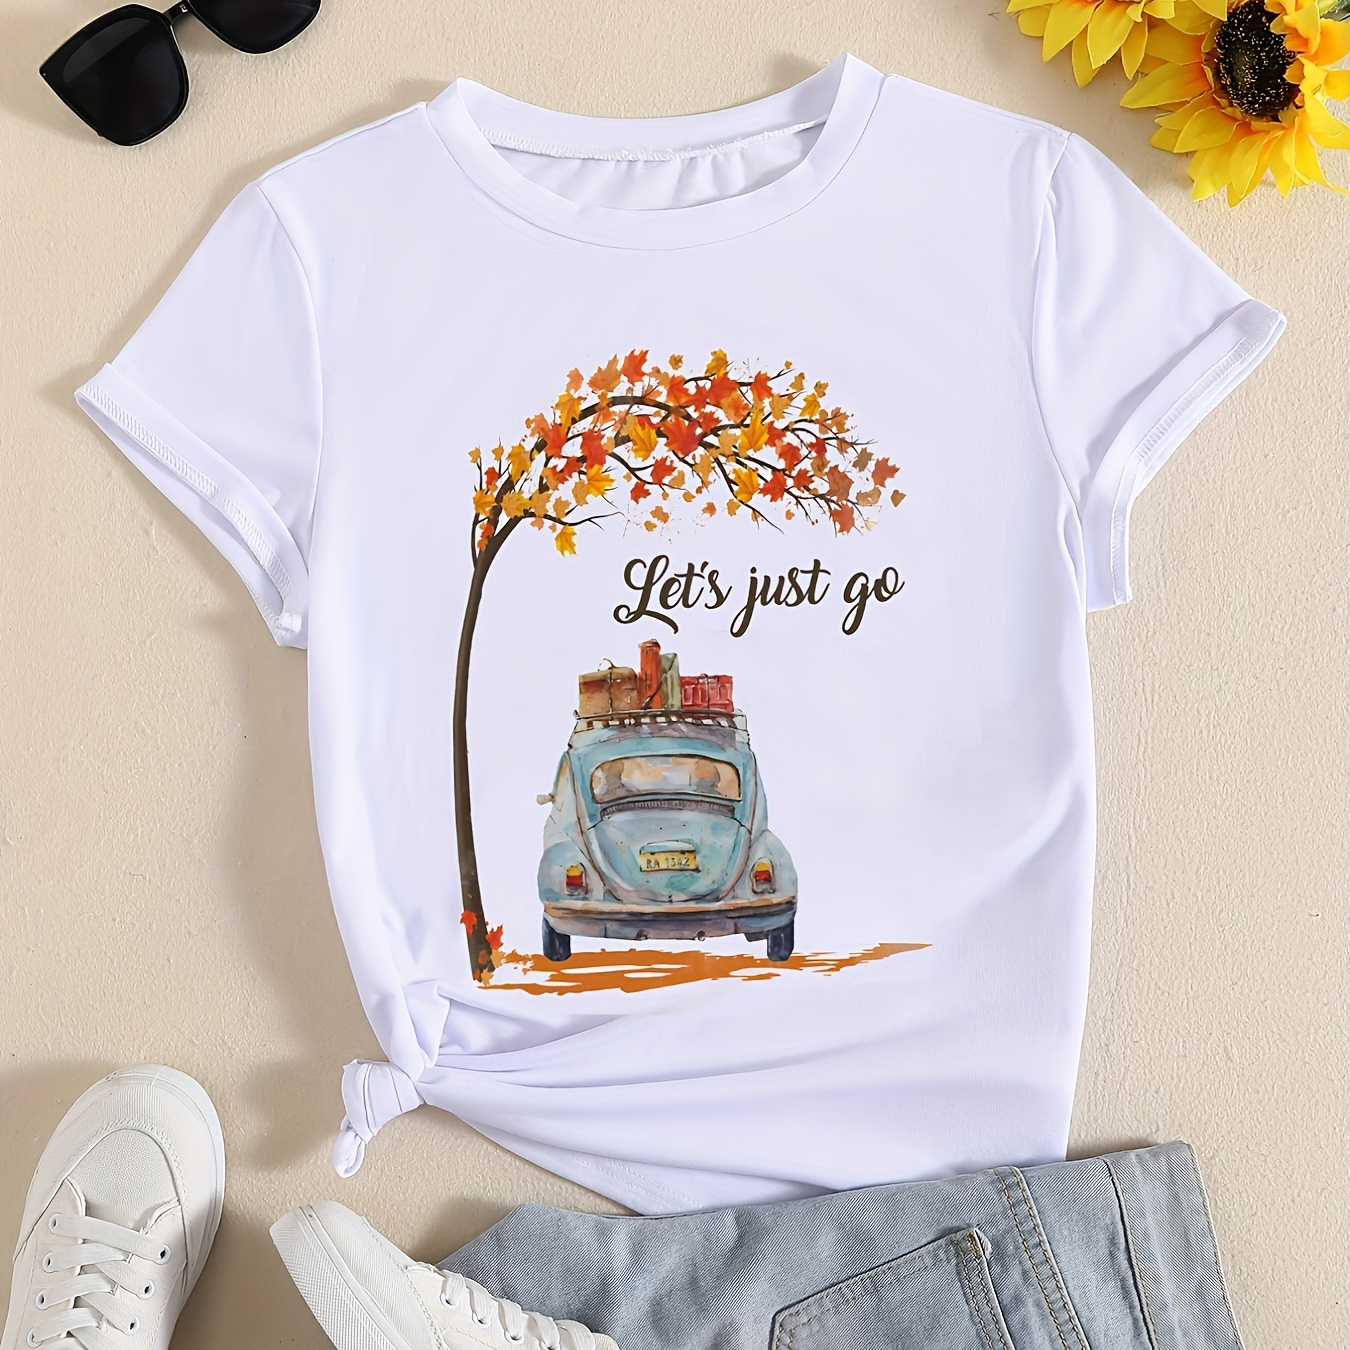 

Letter & Car Print T-shirt, Crew Neck Short Sleeve T-shirt, Casual Every Day Tops, Women's Clothing